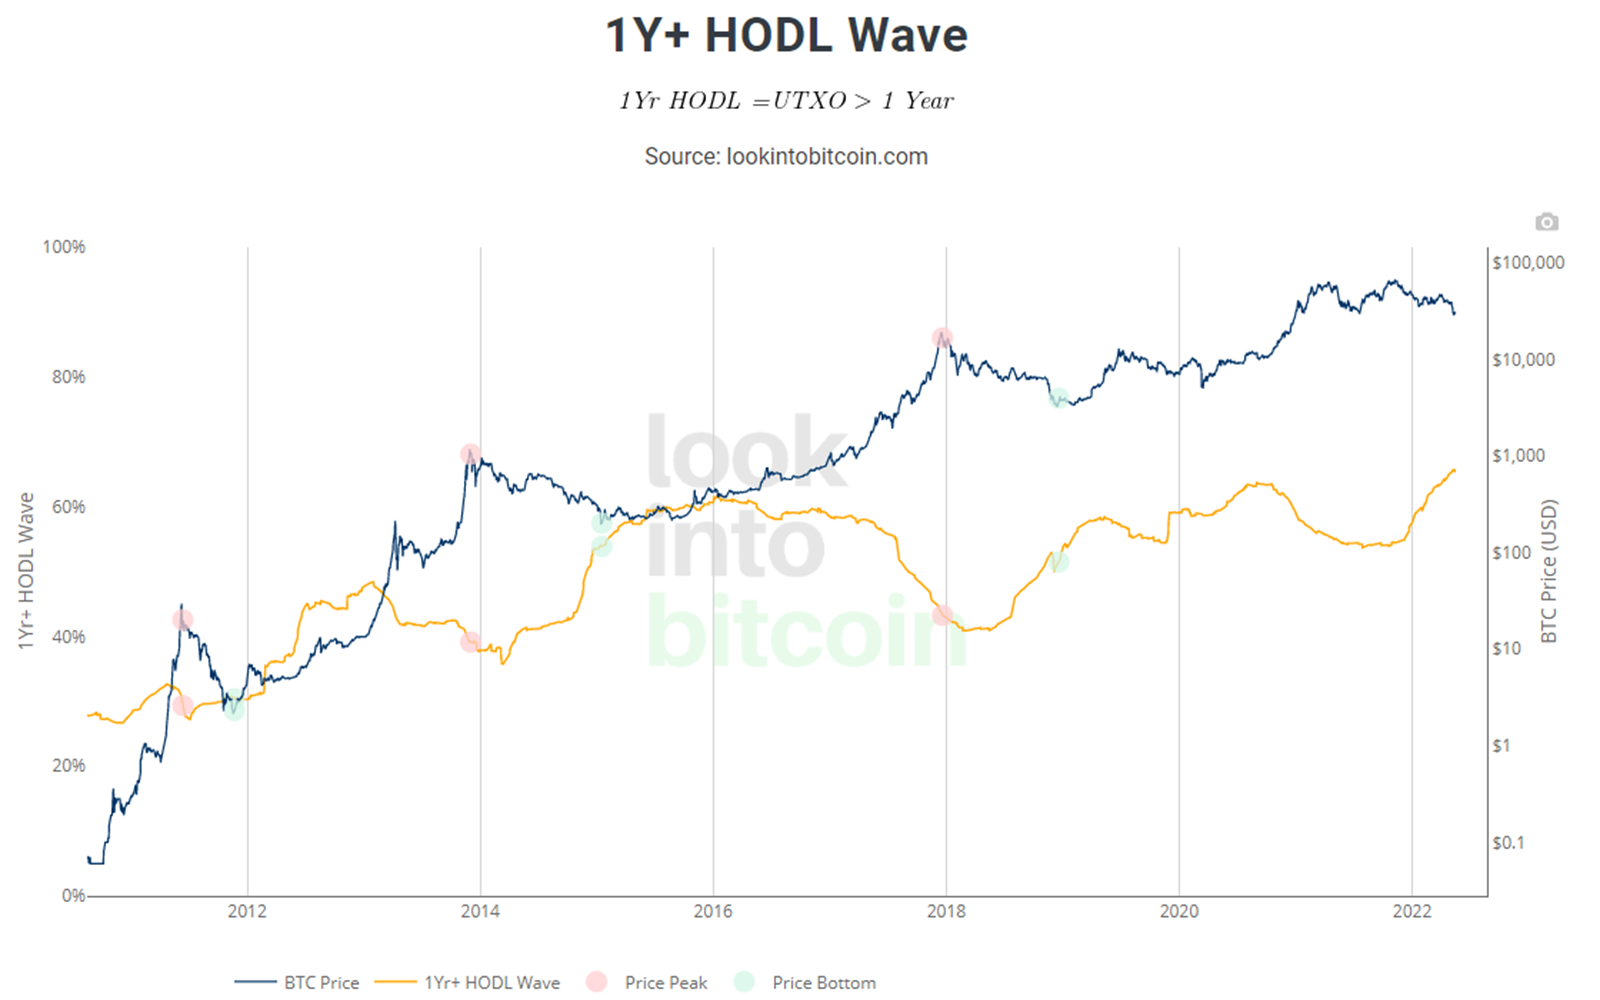 Bitcoin price (blue line), and the percentage of wallet addresses that have not sold bitcoin in a year or more (orange line). Source: lookingintobitcoin.com.